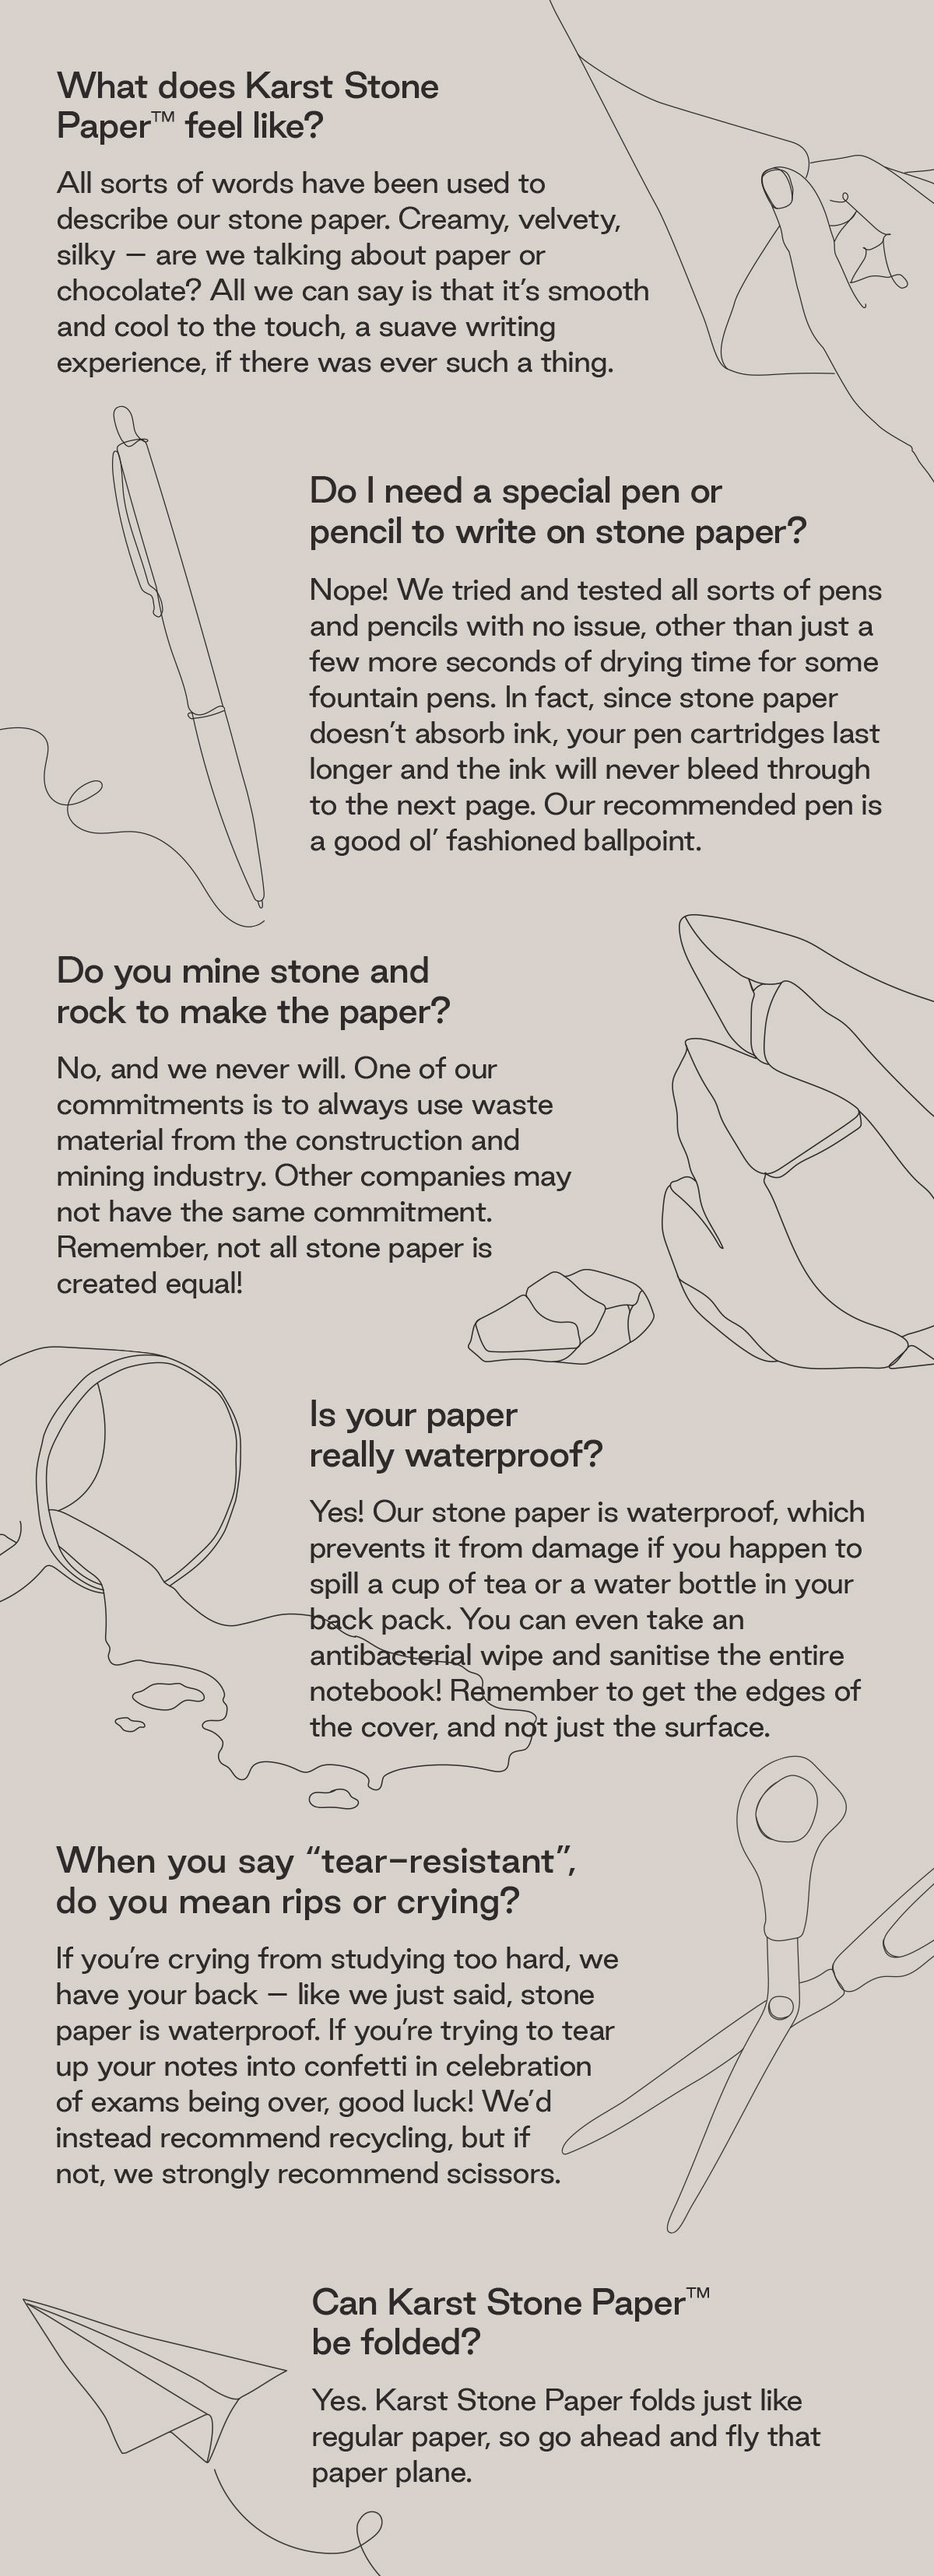 Karst Stone Paper Has Figured Out How To Turn Rocks Into Paper